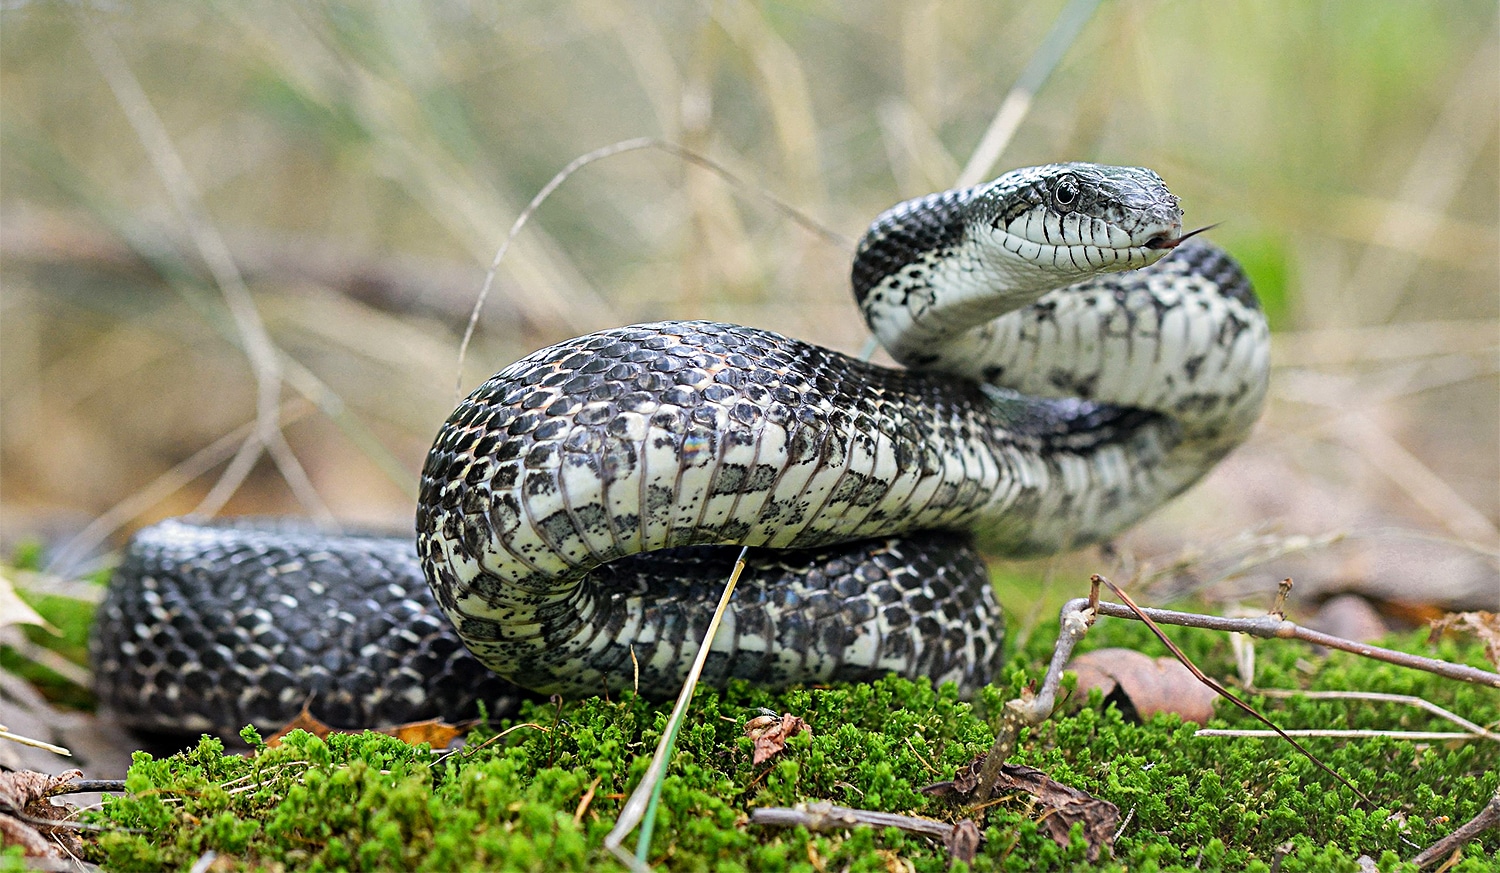 horizontal photo of a Gray Ratsnake about to strike, on grass. Image credit: Will Brown, CC BY 2.0, via Wikimedia Commons